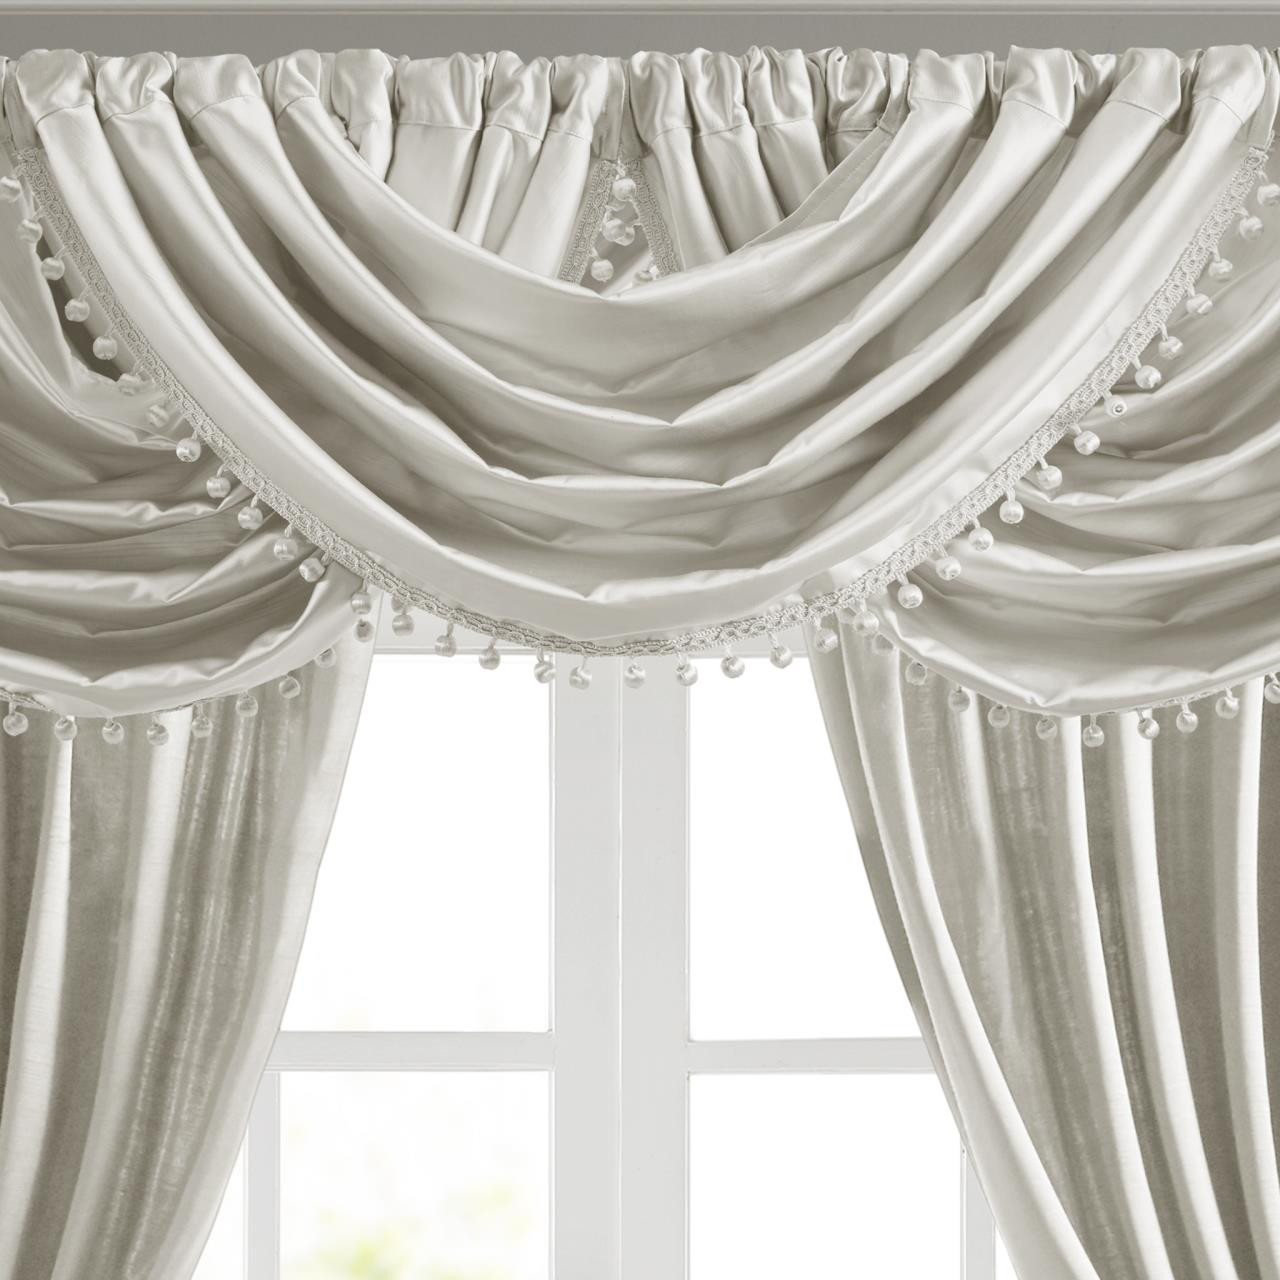 Avignon White Waterfall Valance by Croscill | Paul's Home Fashions